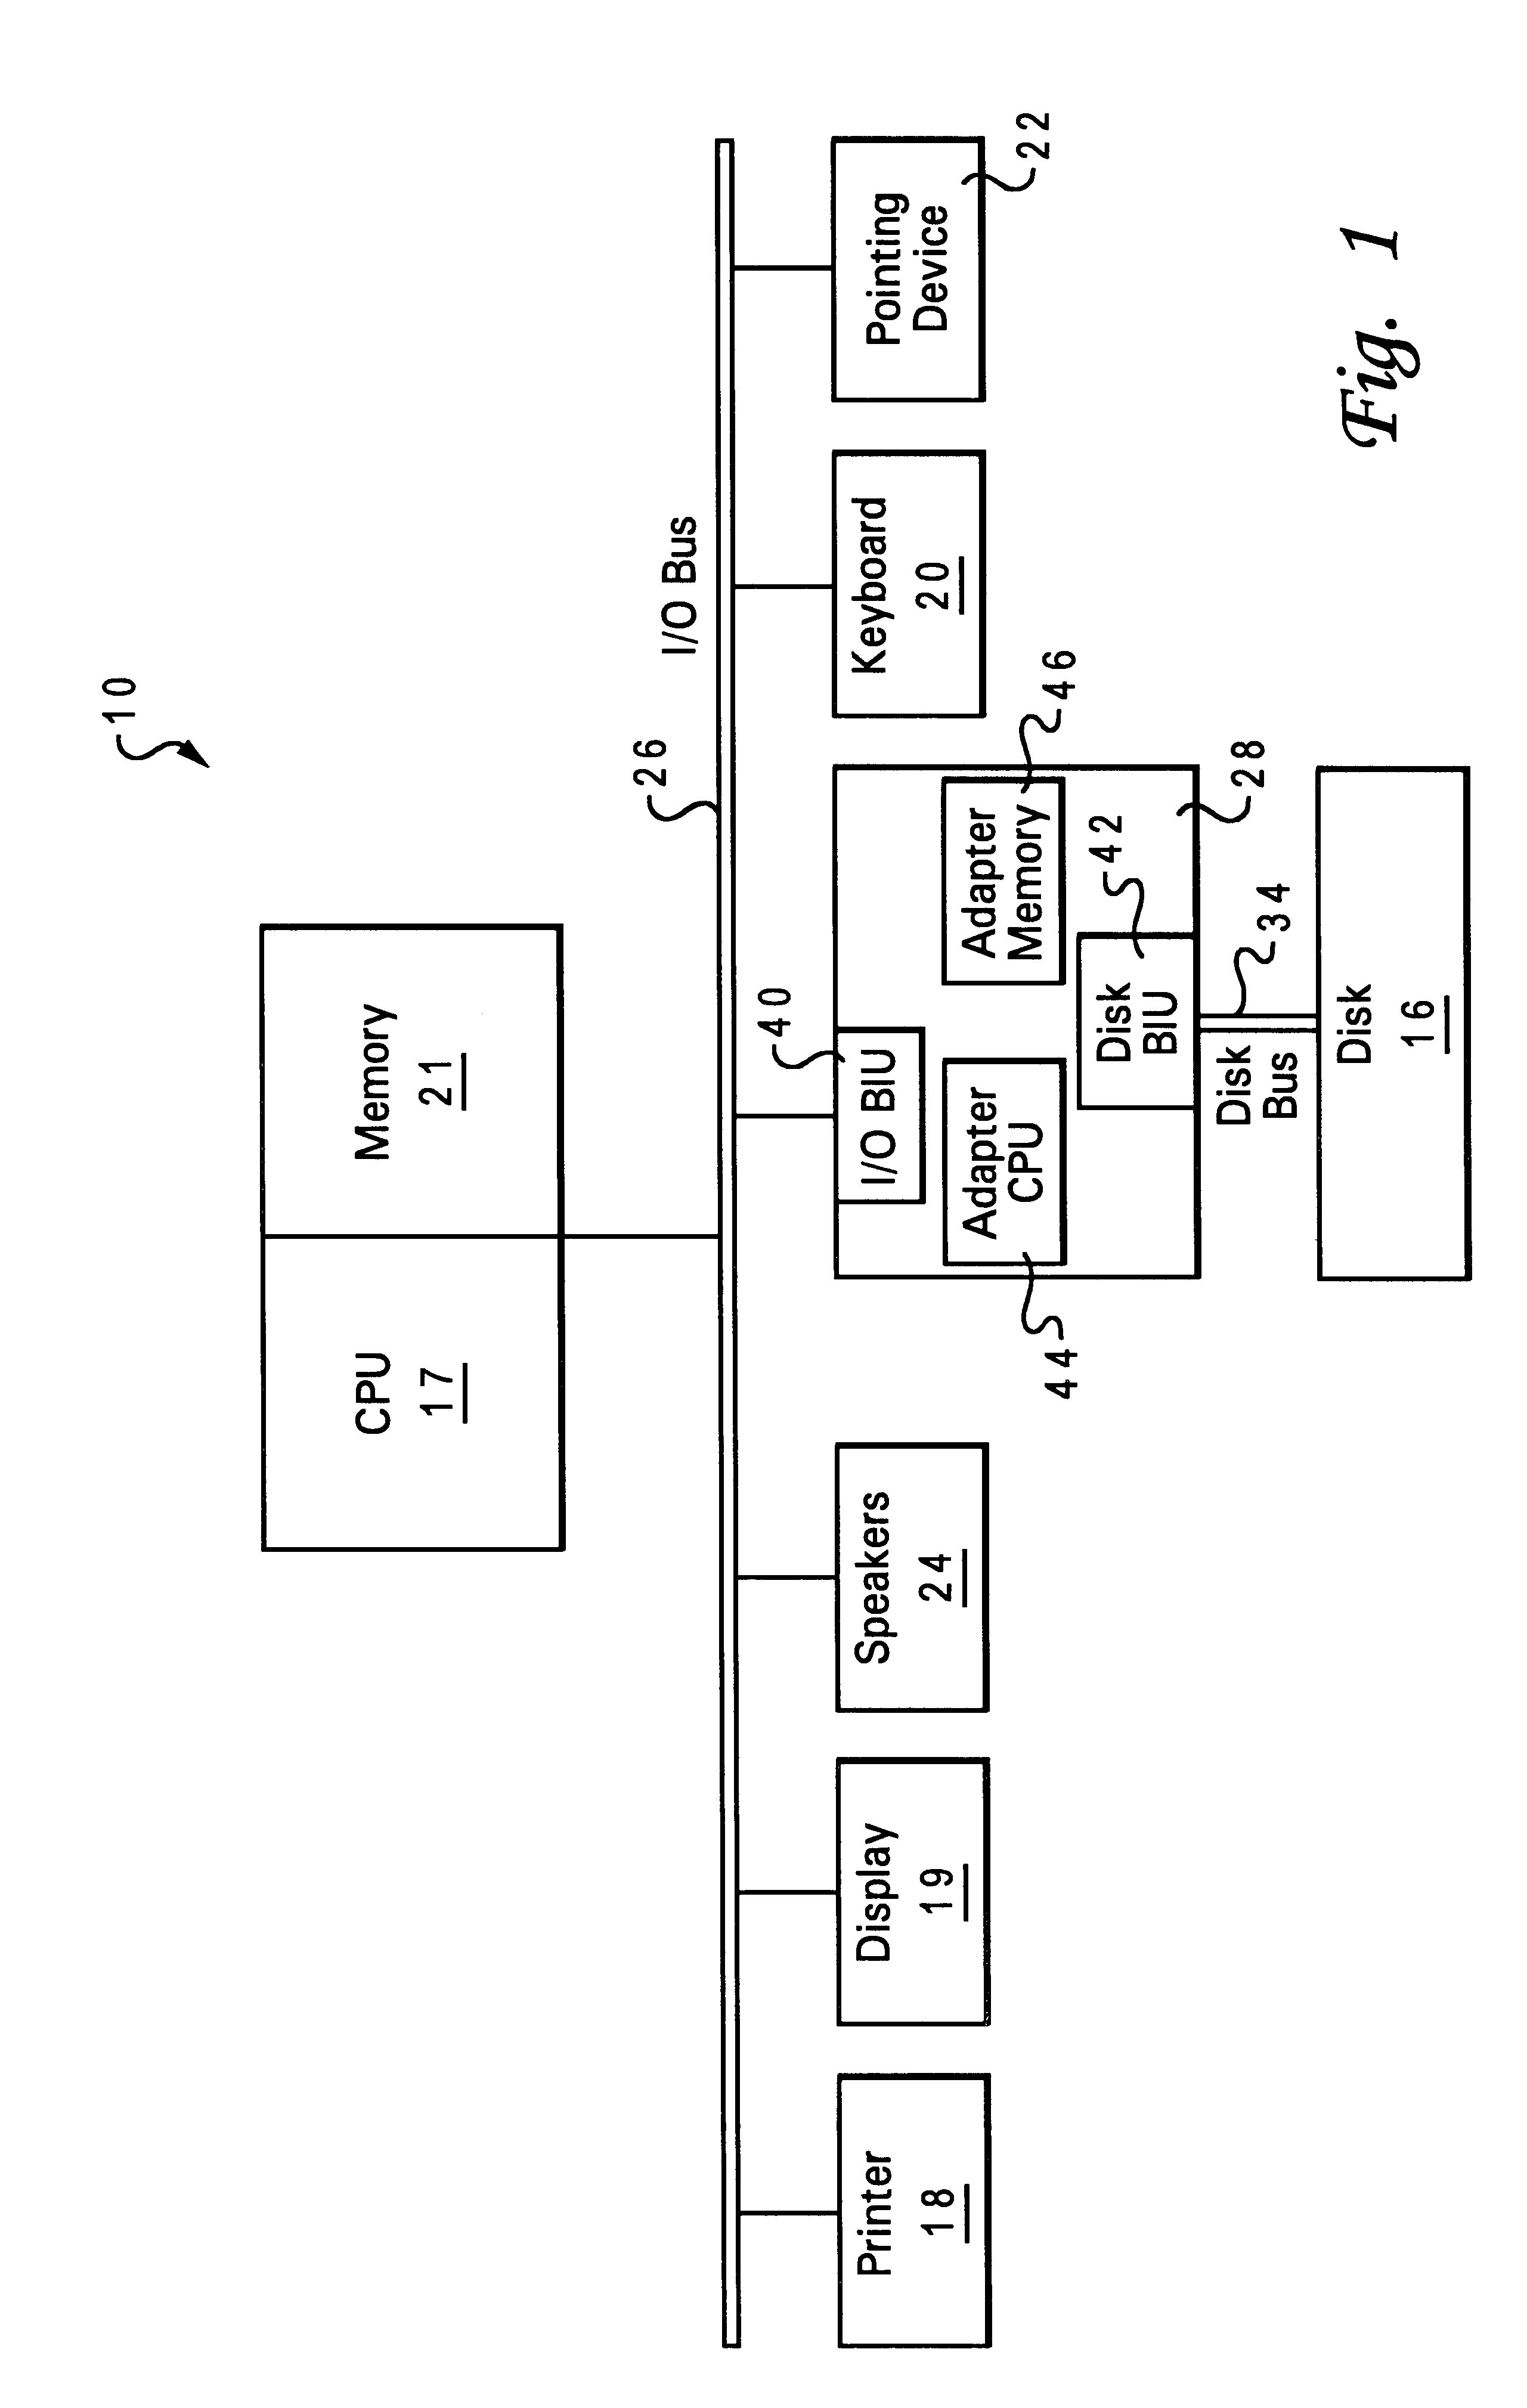 Method and system for the dynamic scheduling of requests to access a storage system